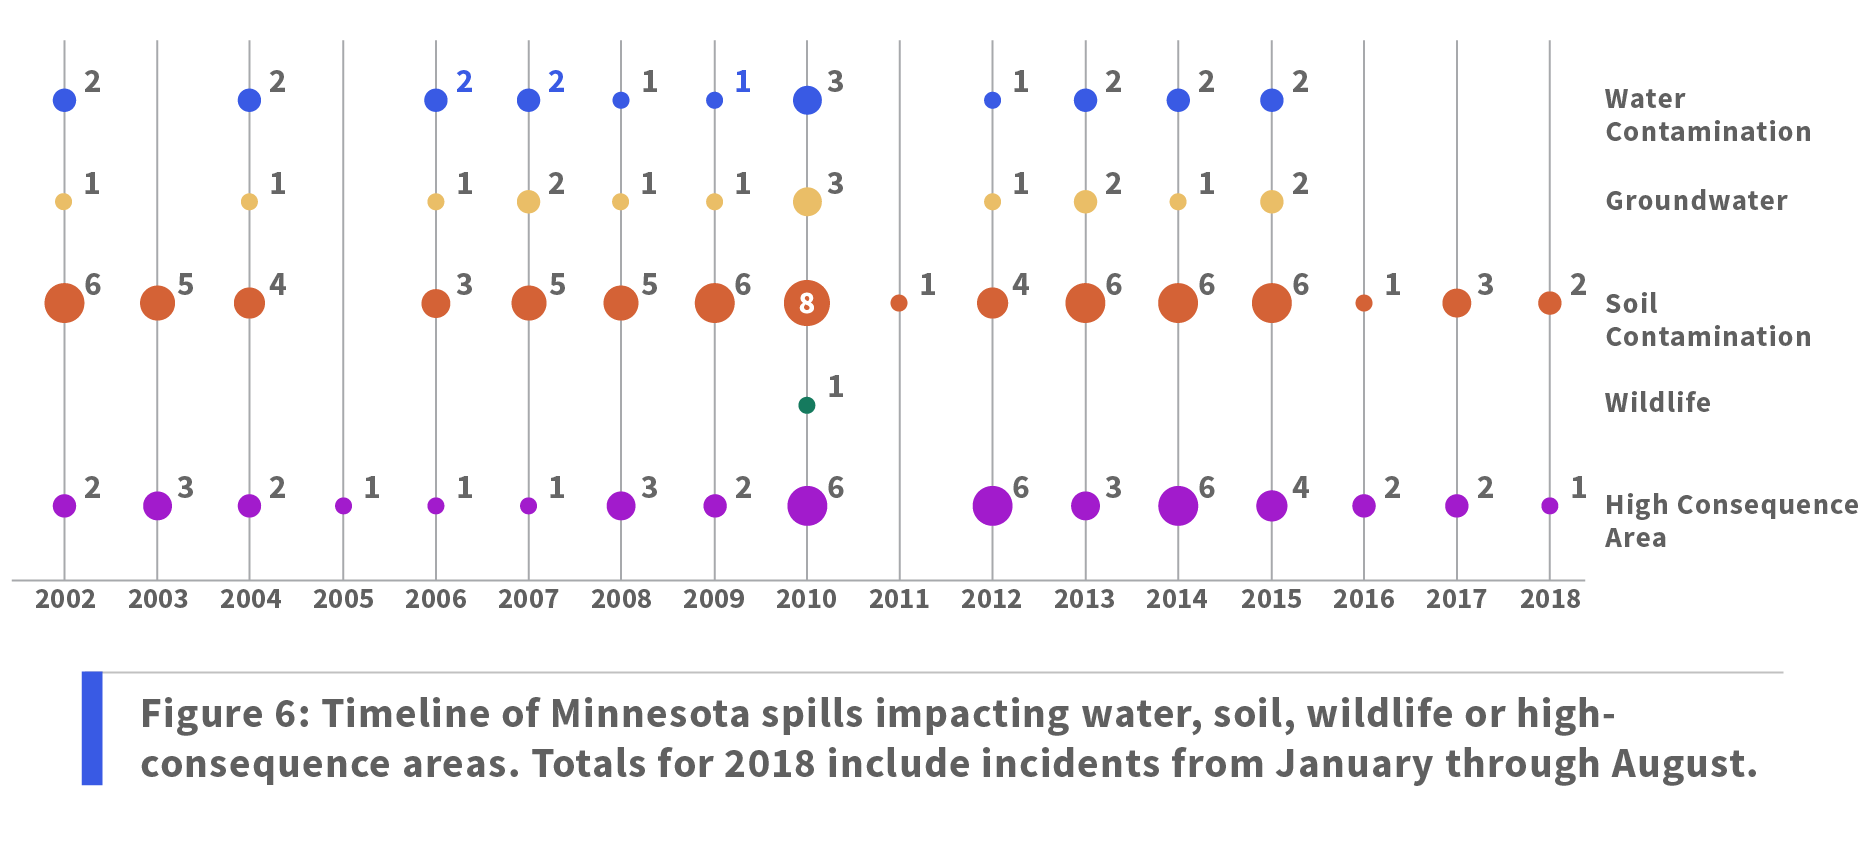 Figure 6: Timeline of Minnesota spills impacting water, soil, wildlife or high-consequence areas. Totals for 2018 include incidents from January through August.